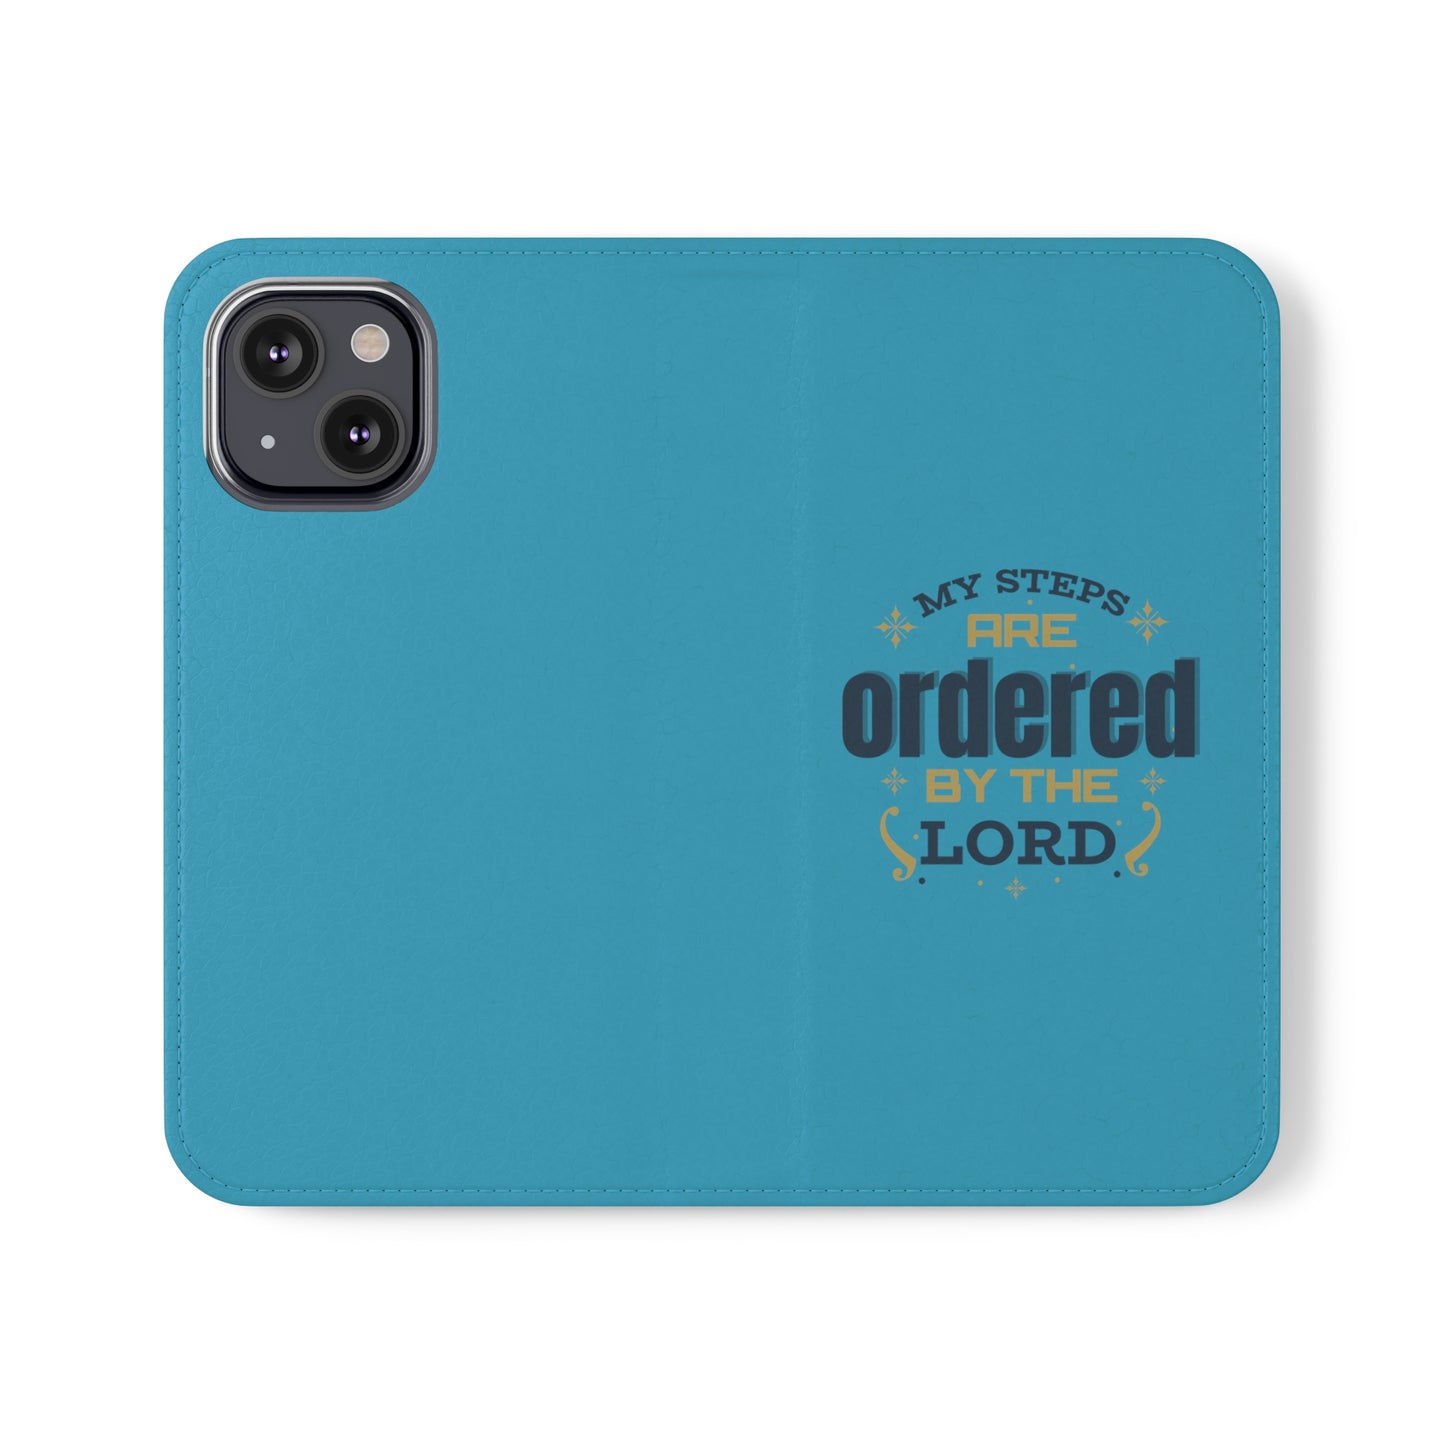 My Steps Are Ordered By The Lord  Phone Flip Cases